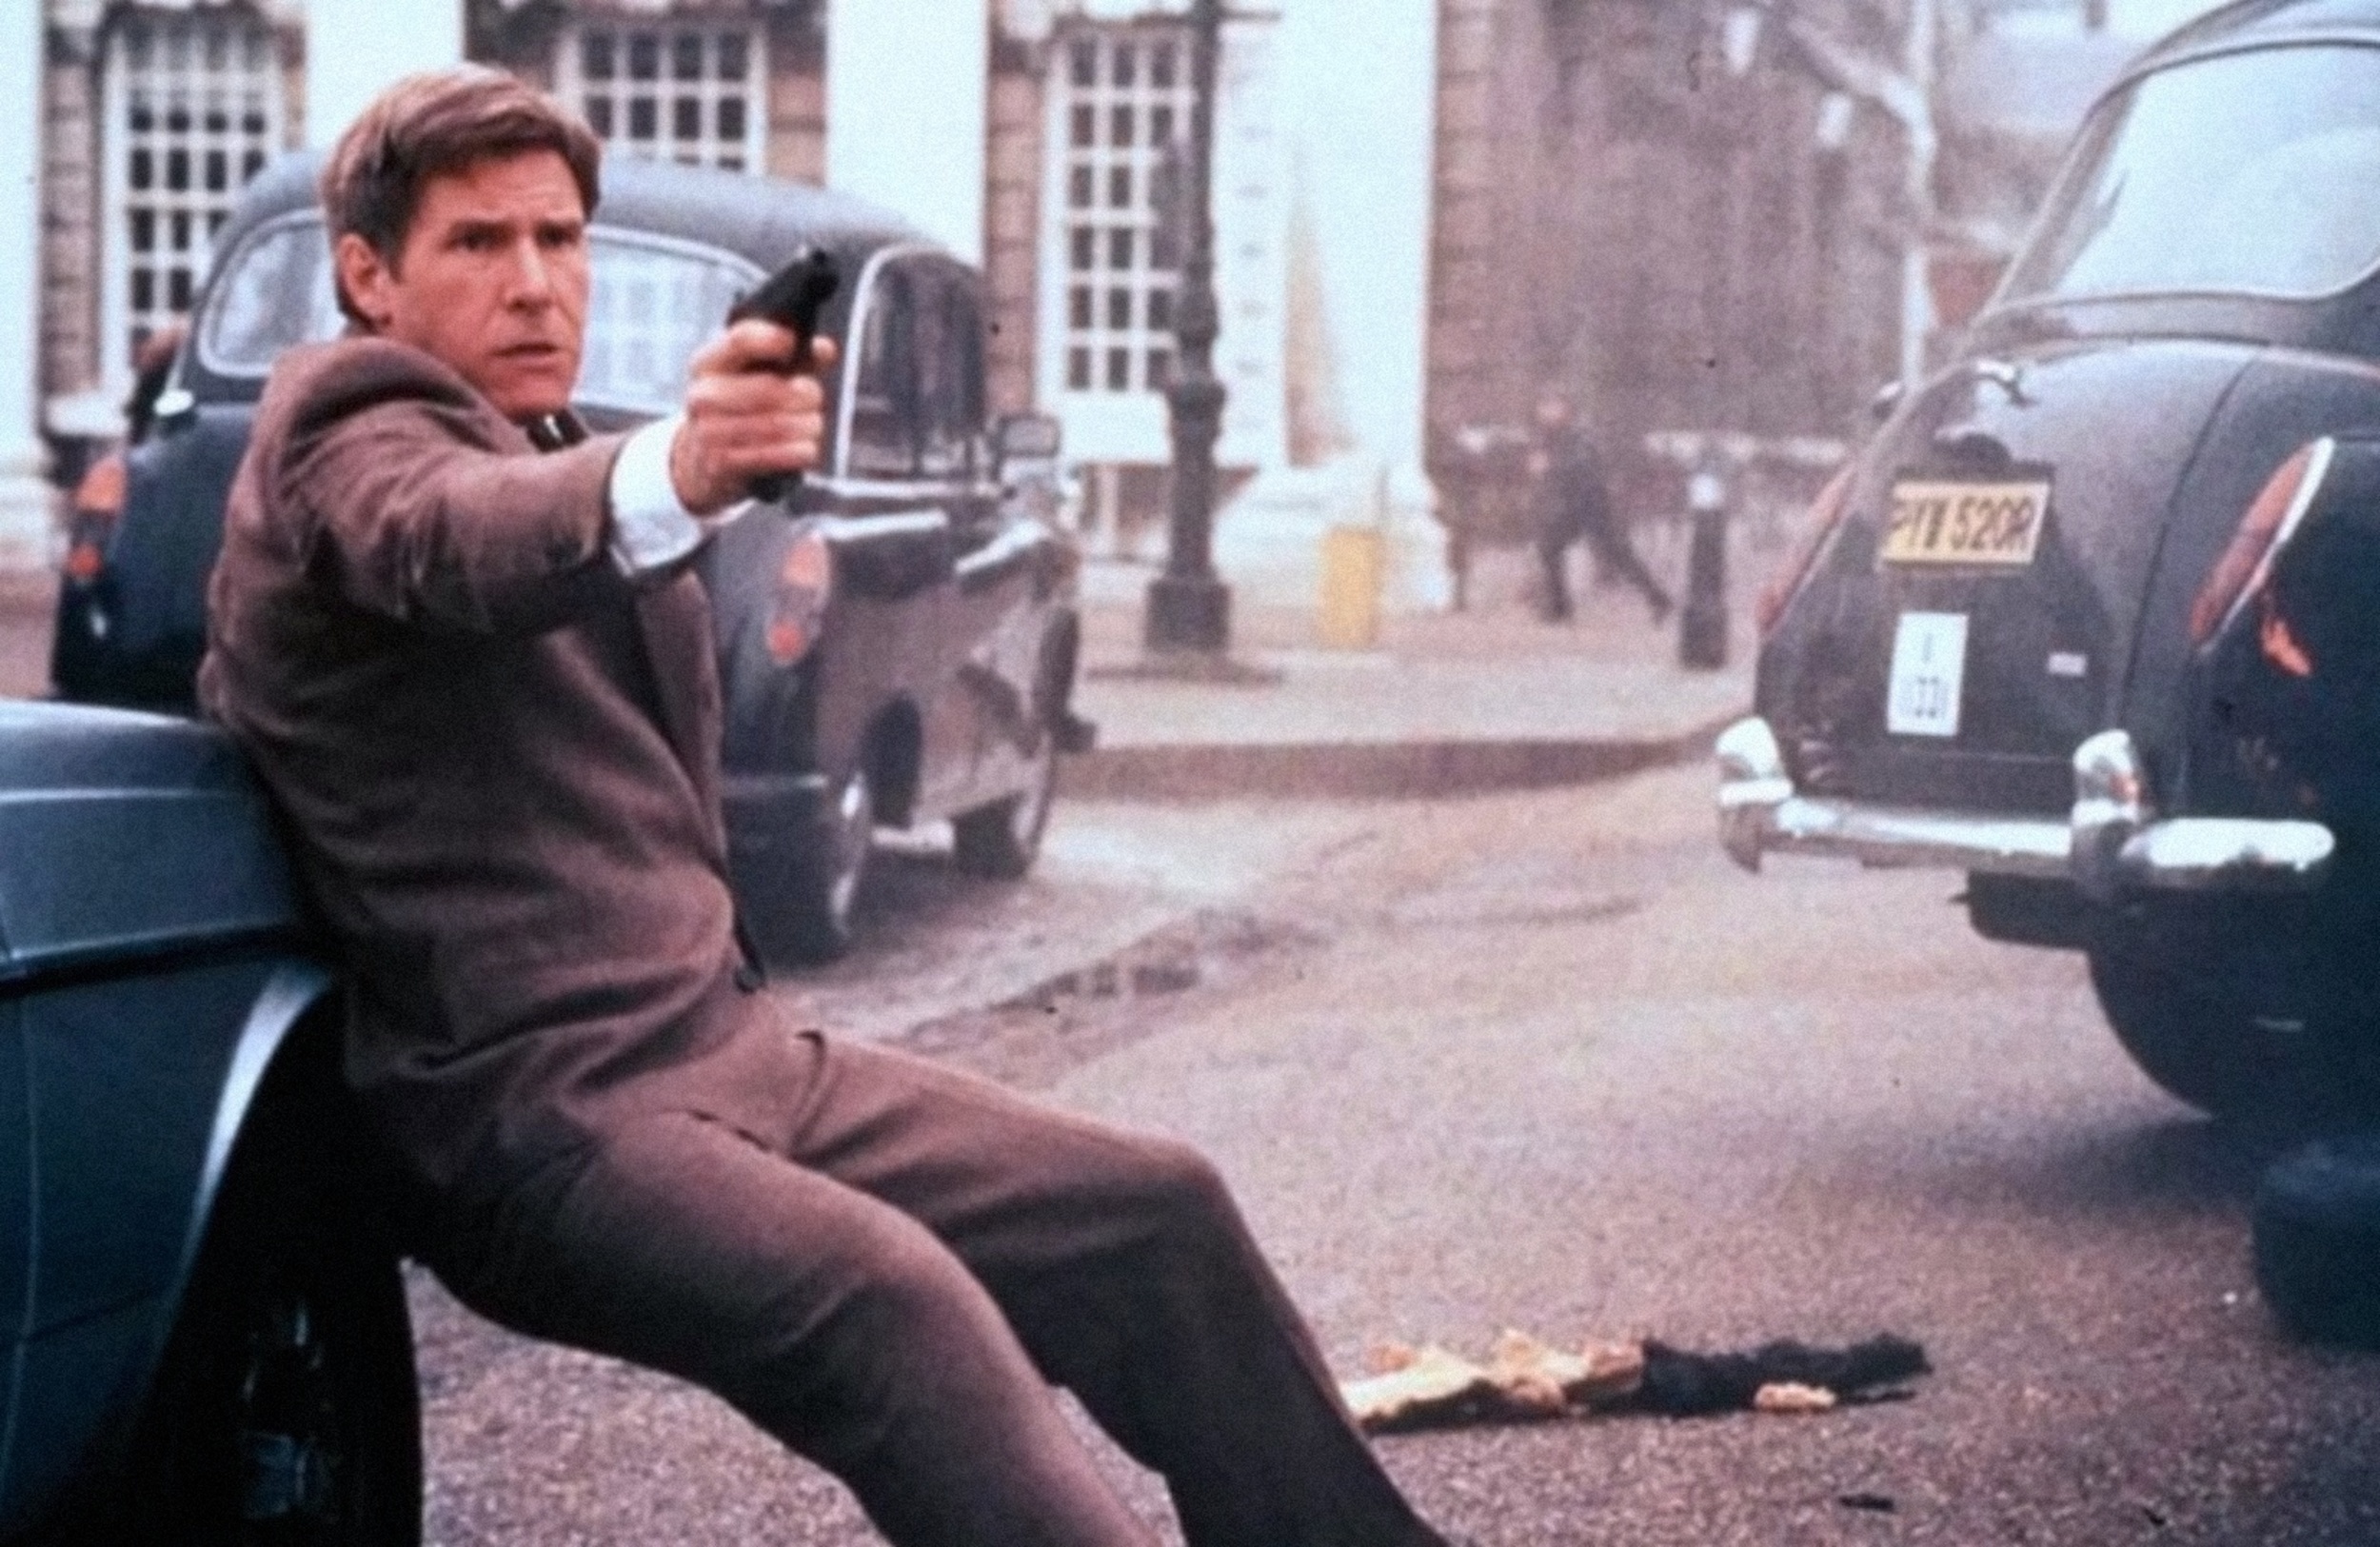 <p>OK, so Jack Ryan isn’t quite on the level of a Han Solo or Indiana Jones. Still, the Tom Clancy character has shown up in several films, so it’s another successful and notable role for the actor. Ford wasn’t the first Clancy – that was Alec Baldwin – but he played the role twice, starting with “Patriot Games.”</p><p>You may also like: <a href='https://www.yardbarker.com/entertainment/articles/the_20_best_creature_features/s1__39455343'>The 20 best creature features</a></p>